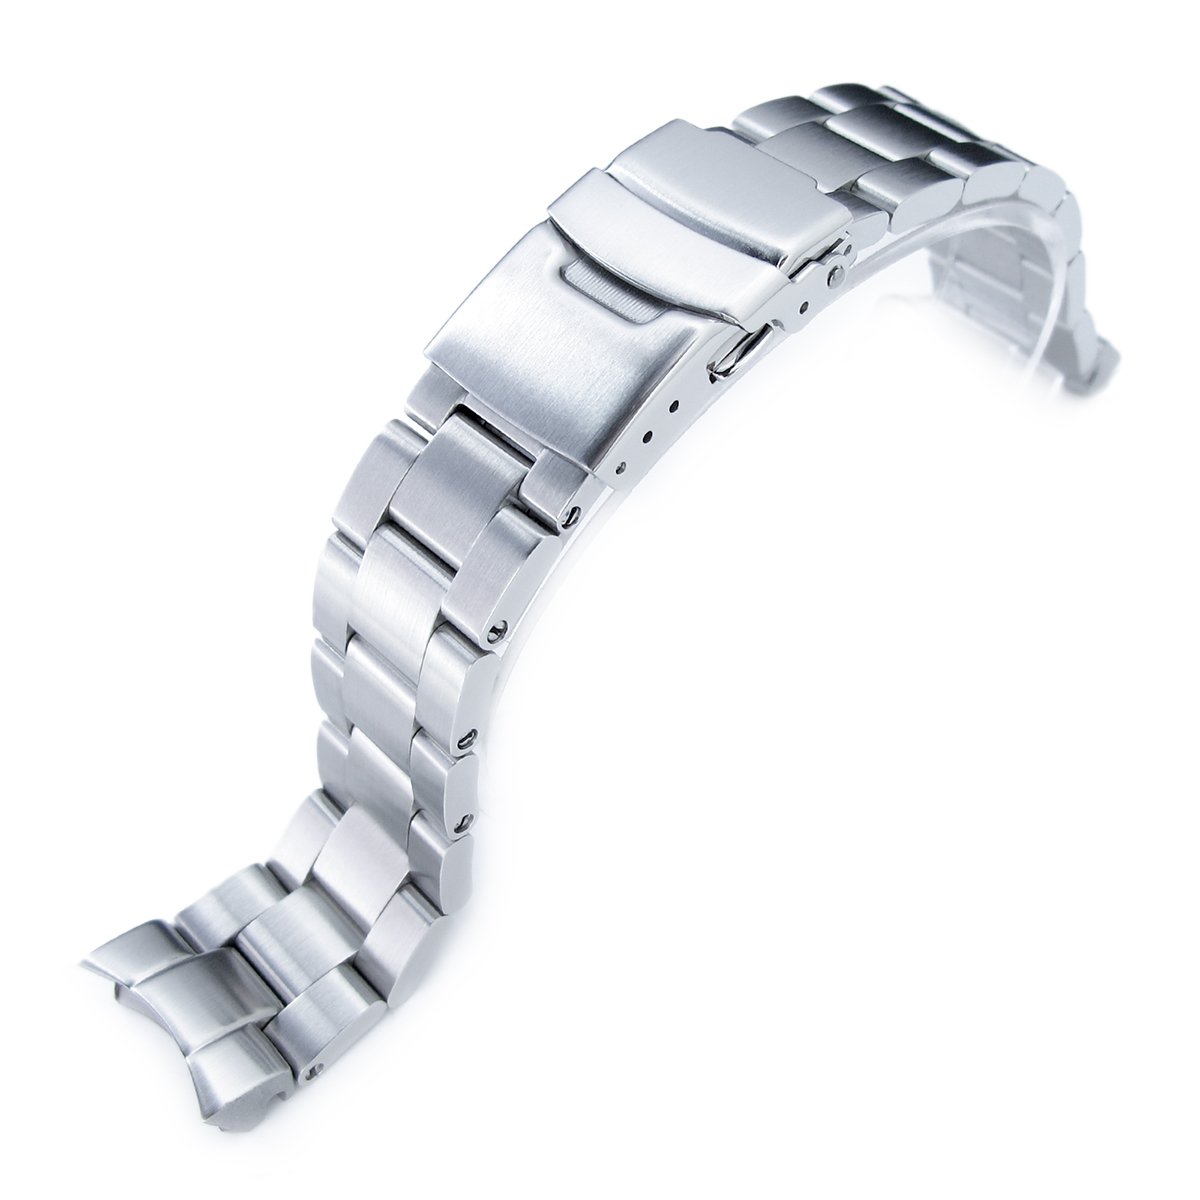 MiLTAT 20mm Watch Band for Seiko SKX013, Super-O 316L Stainless Steel Screw-Link